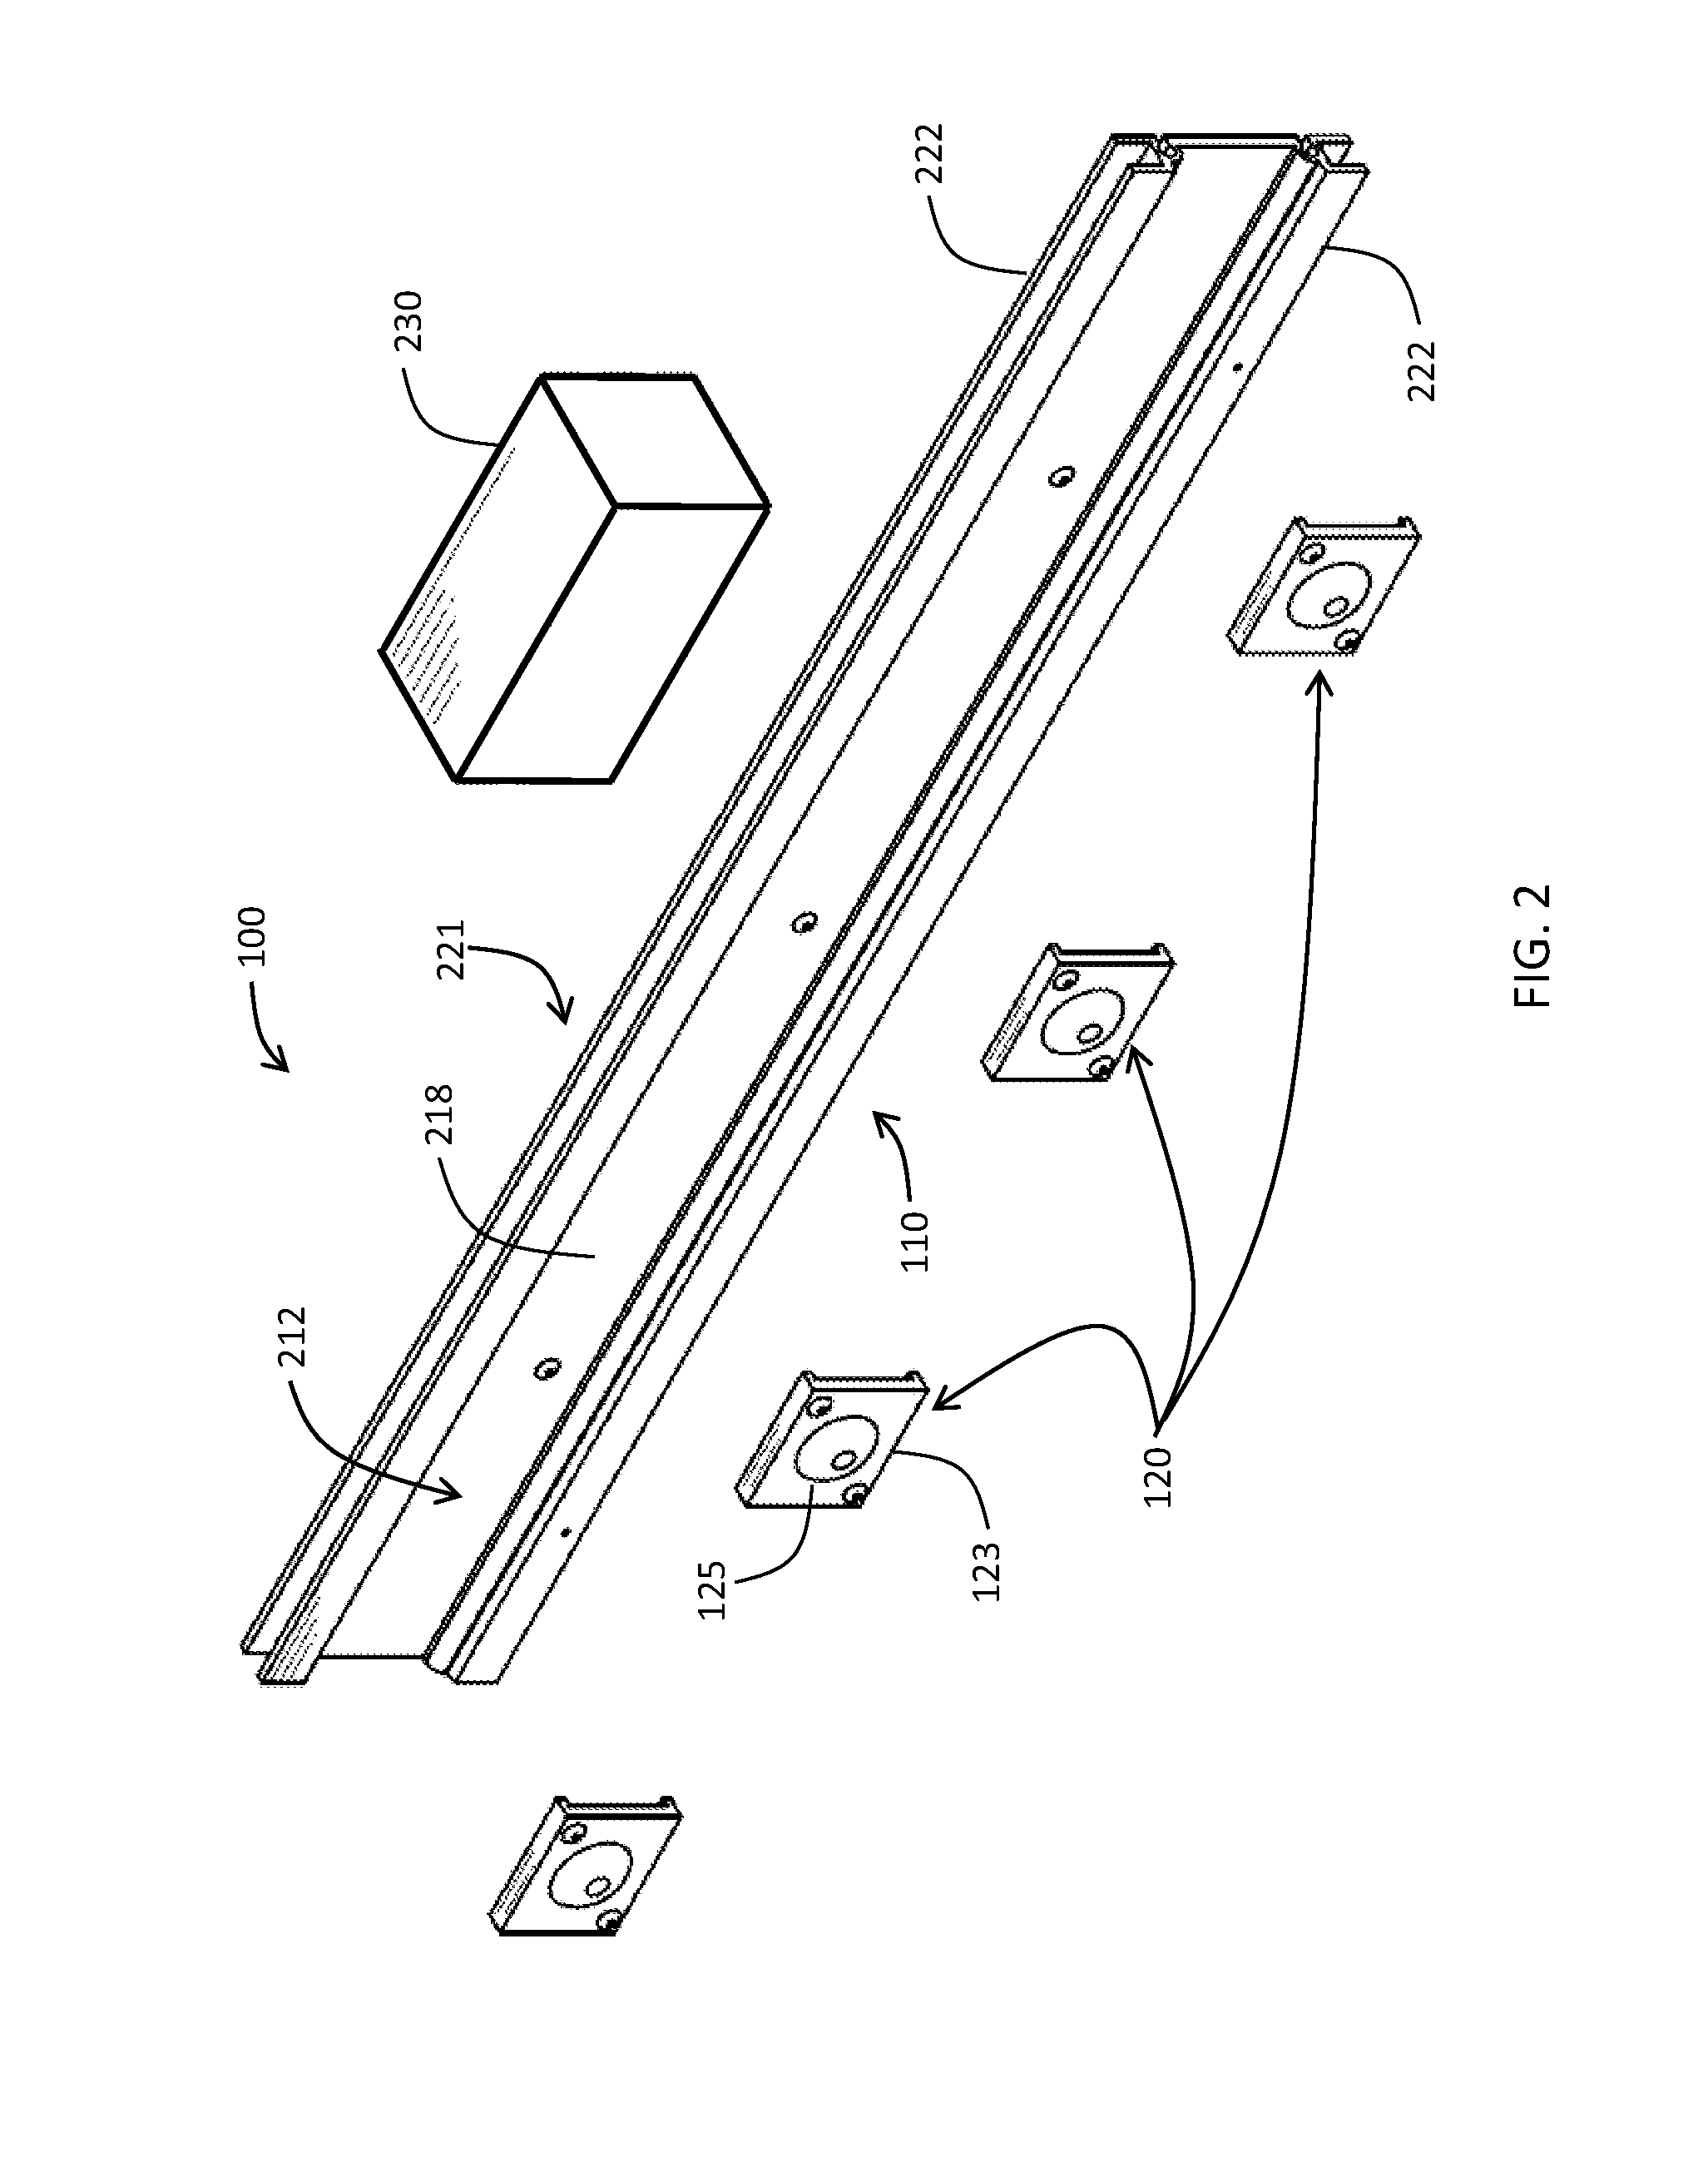 Configurable linear light assembly and associated methods